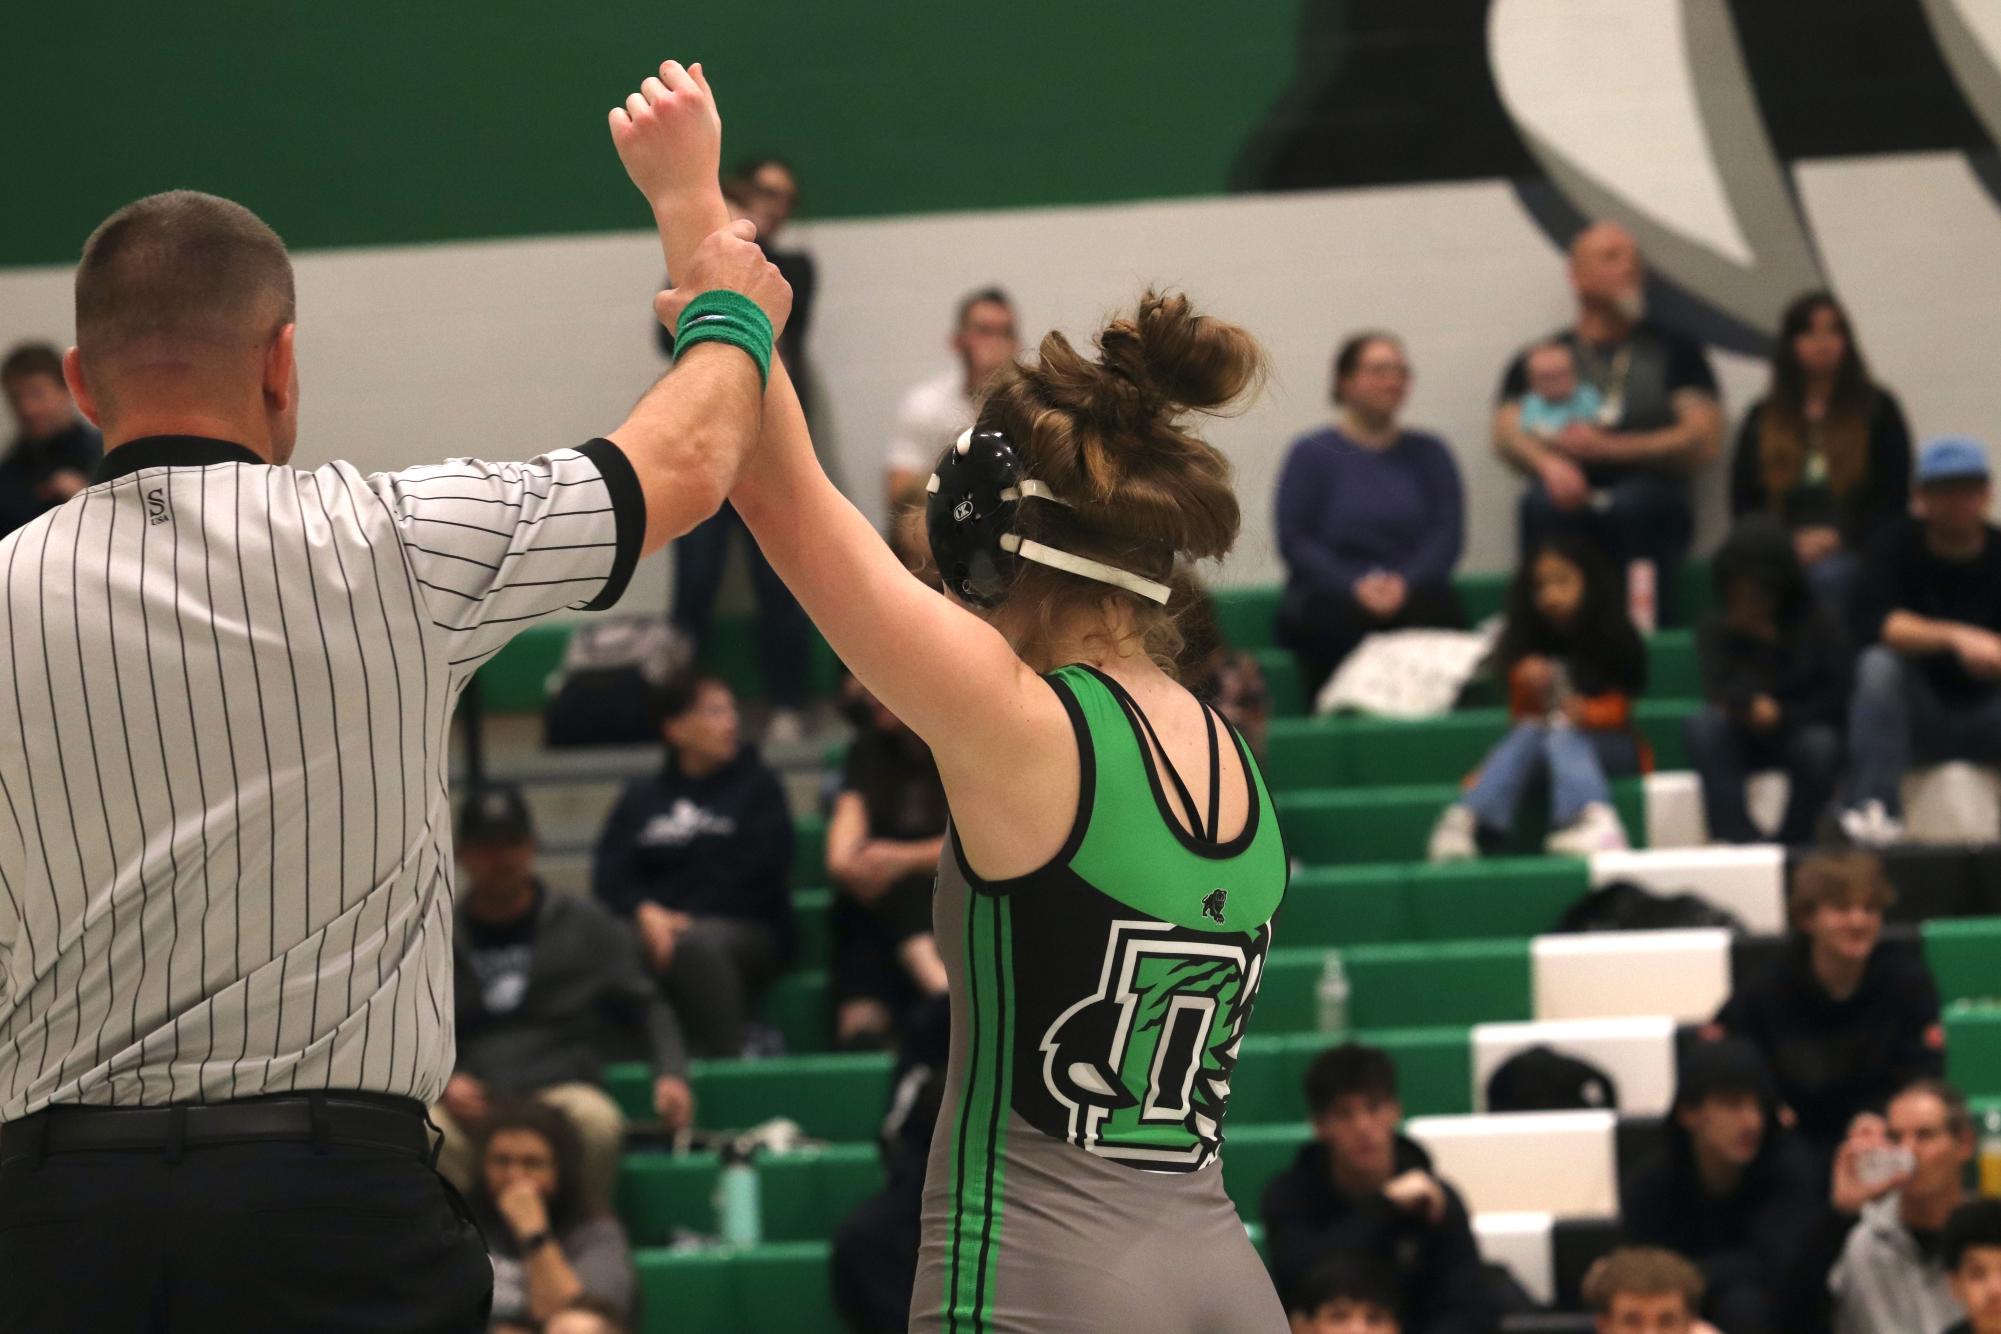 Varsity+wrestling+vs.+Salina+South+and+Campus+%28Photos+by+Leana+Tuttle%29